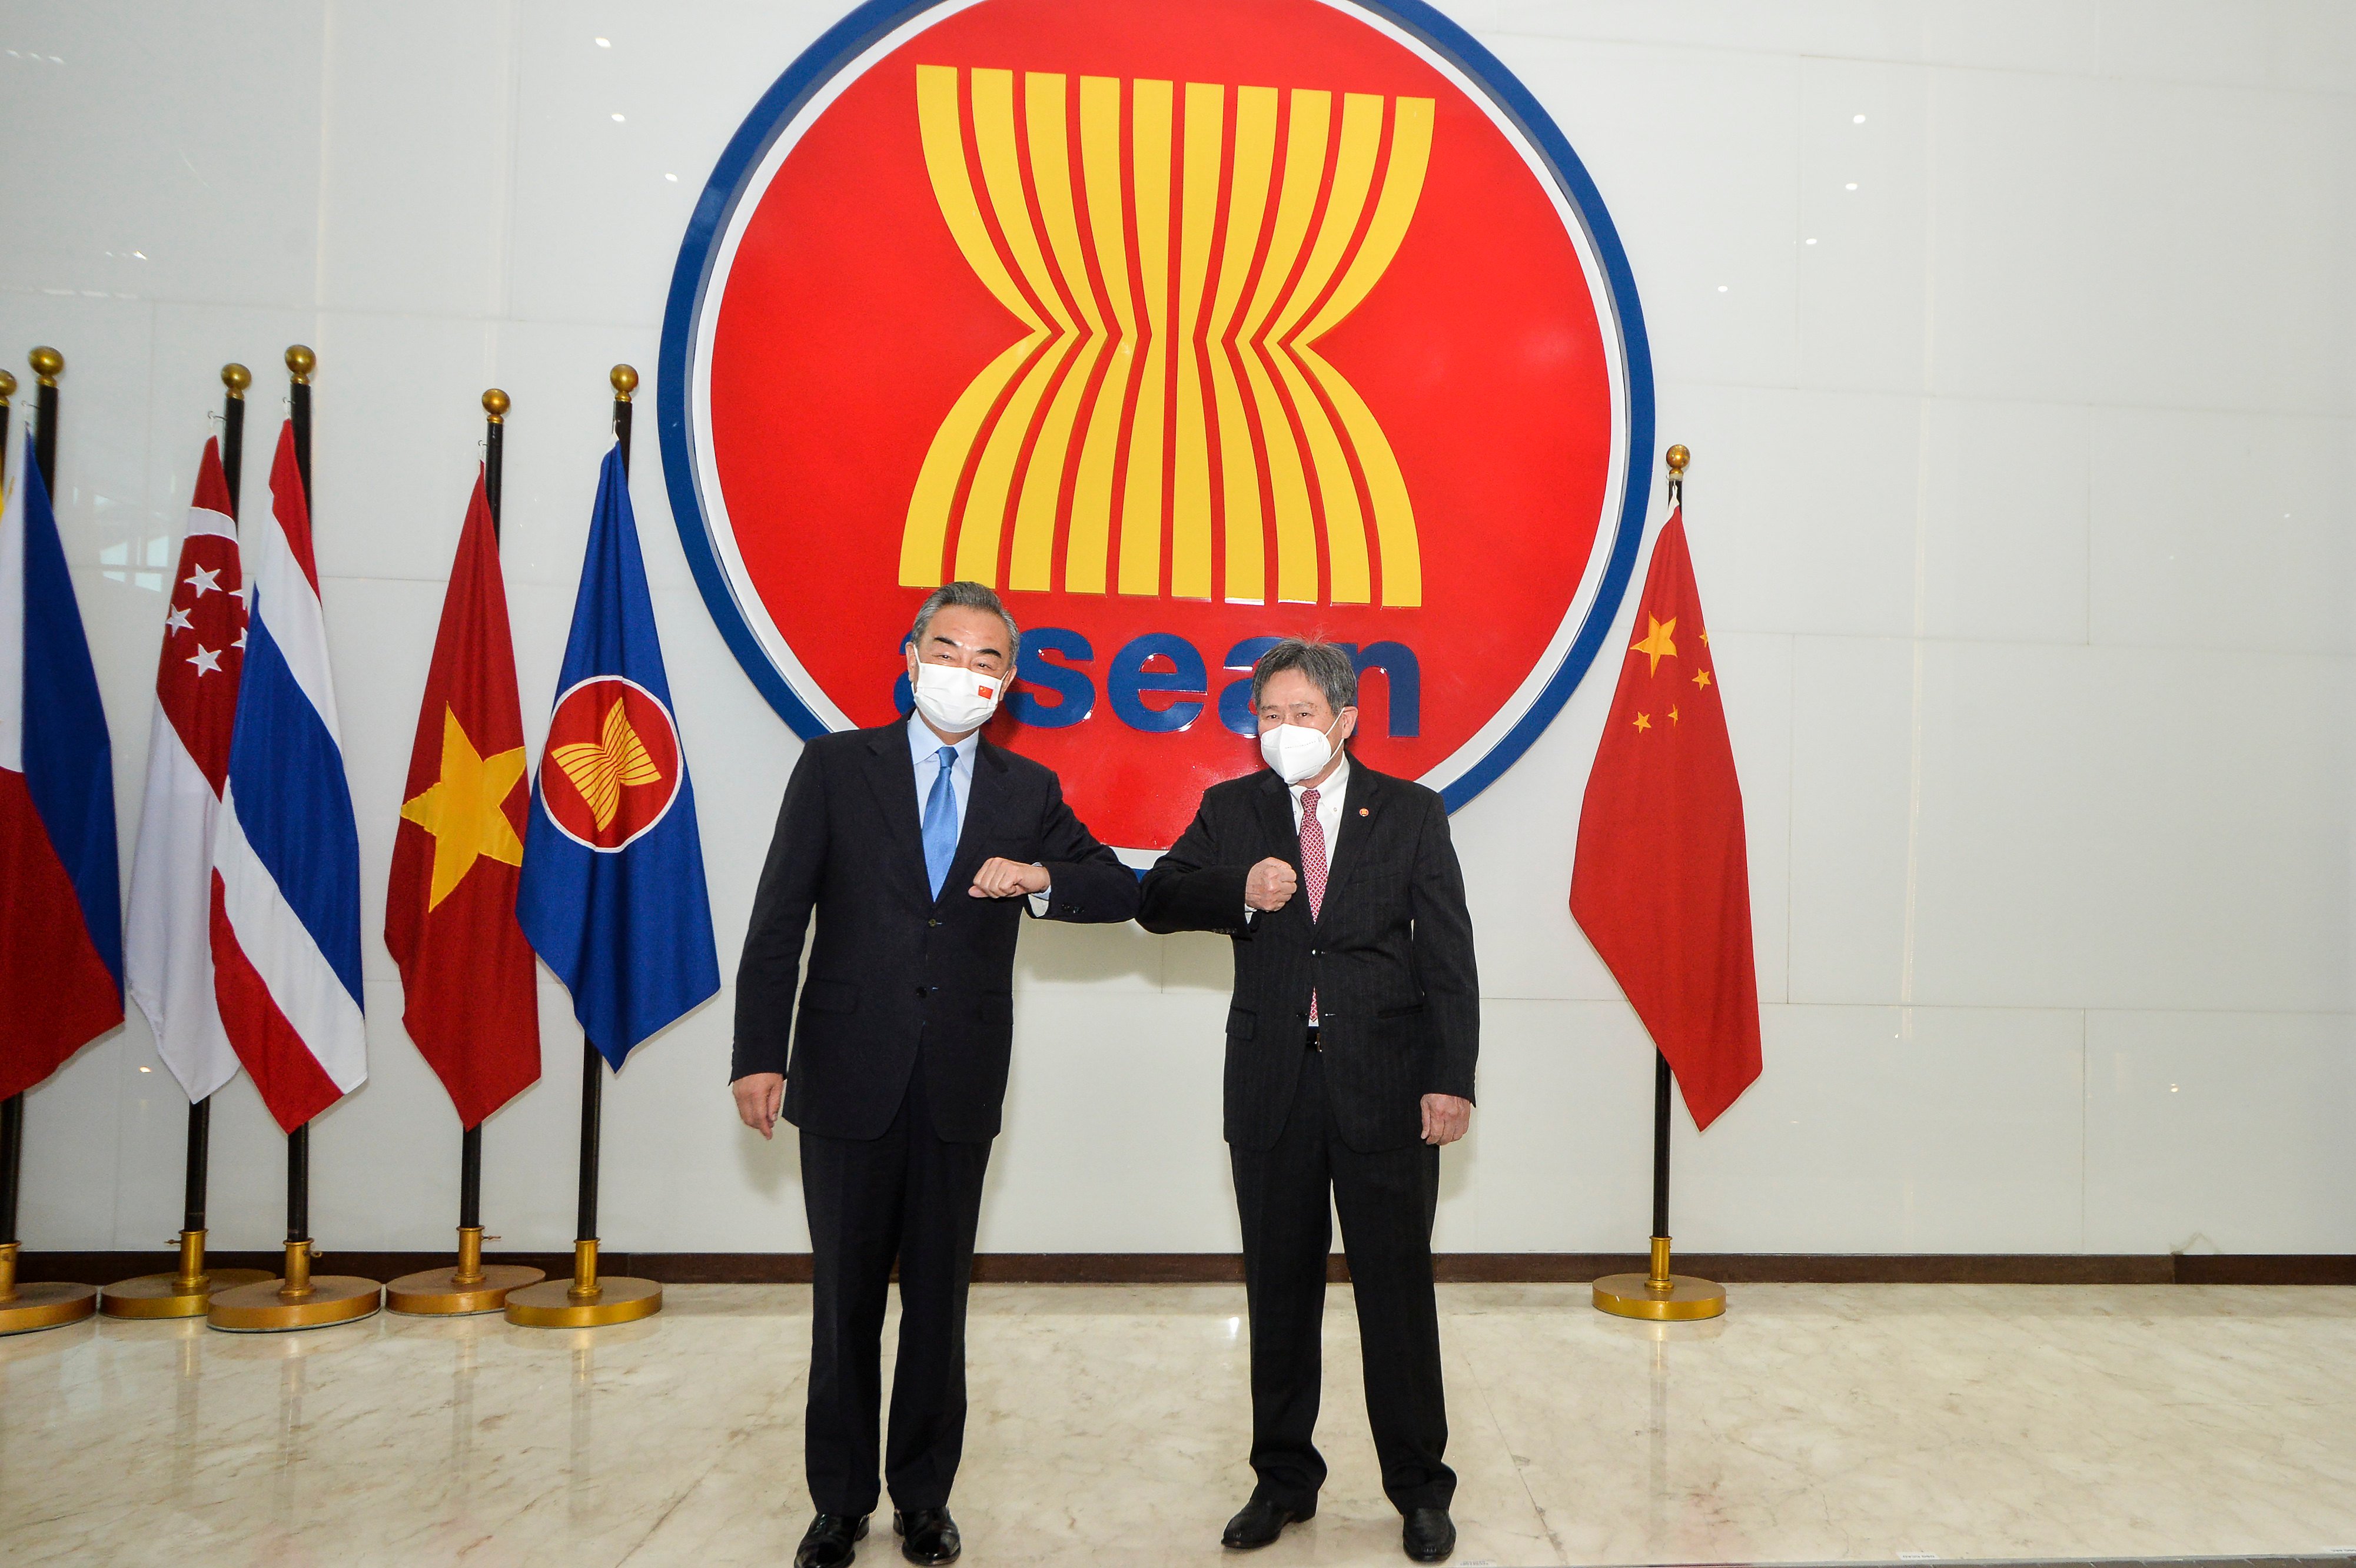 Chinese Foreign Minister Wang Yi (left) with Asean Secretary General Lim Jock Hoi at the Asean Secretariat in Jakarta, Indonesia in July. Photo: Xinhua